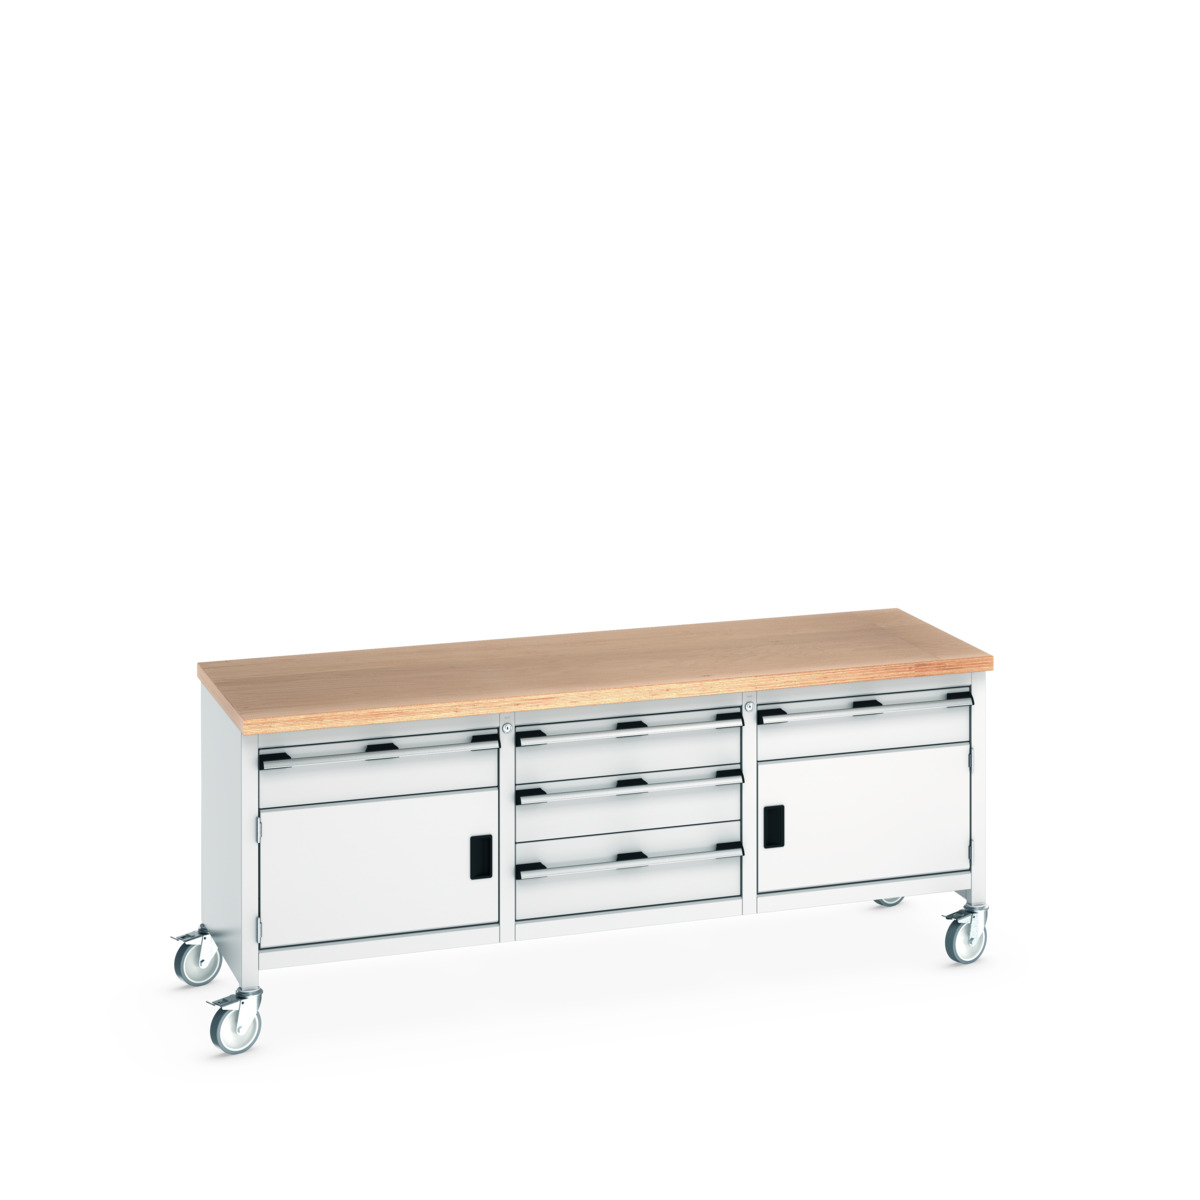 41002133.16V - cubio mobile storage bench (mpx)